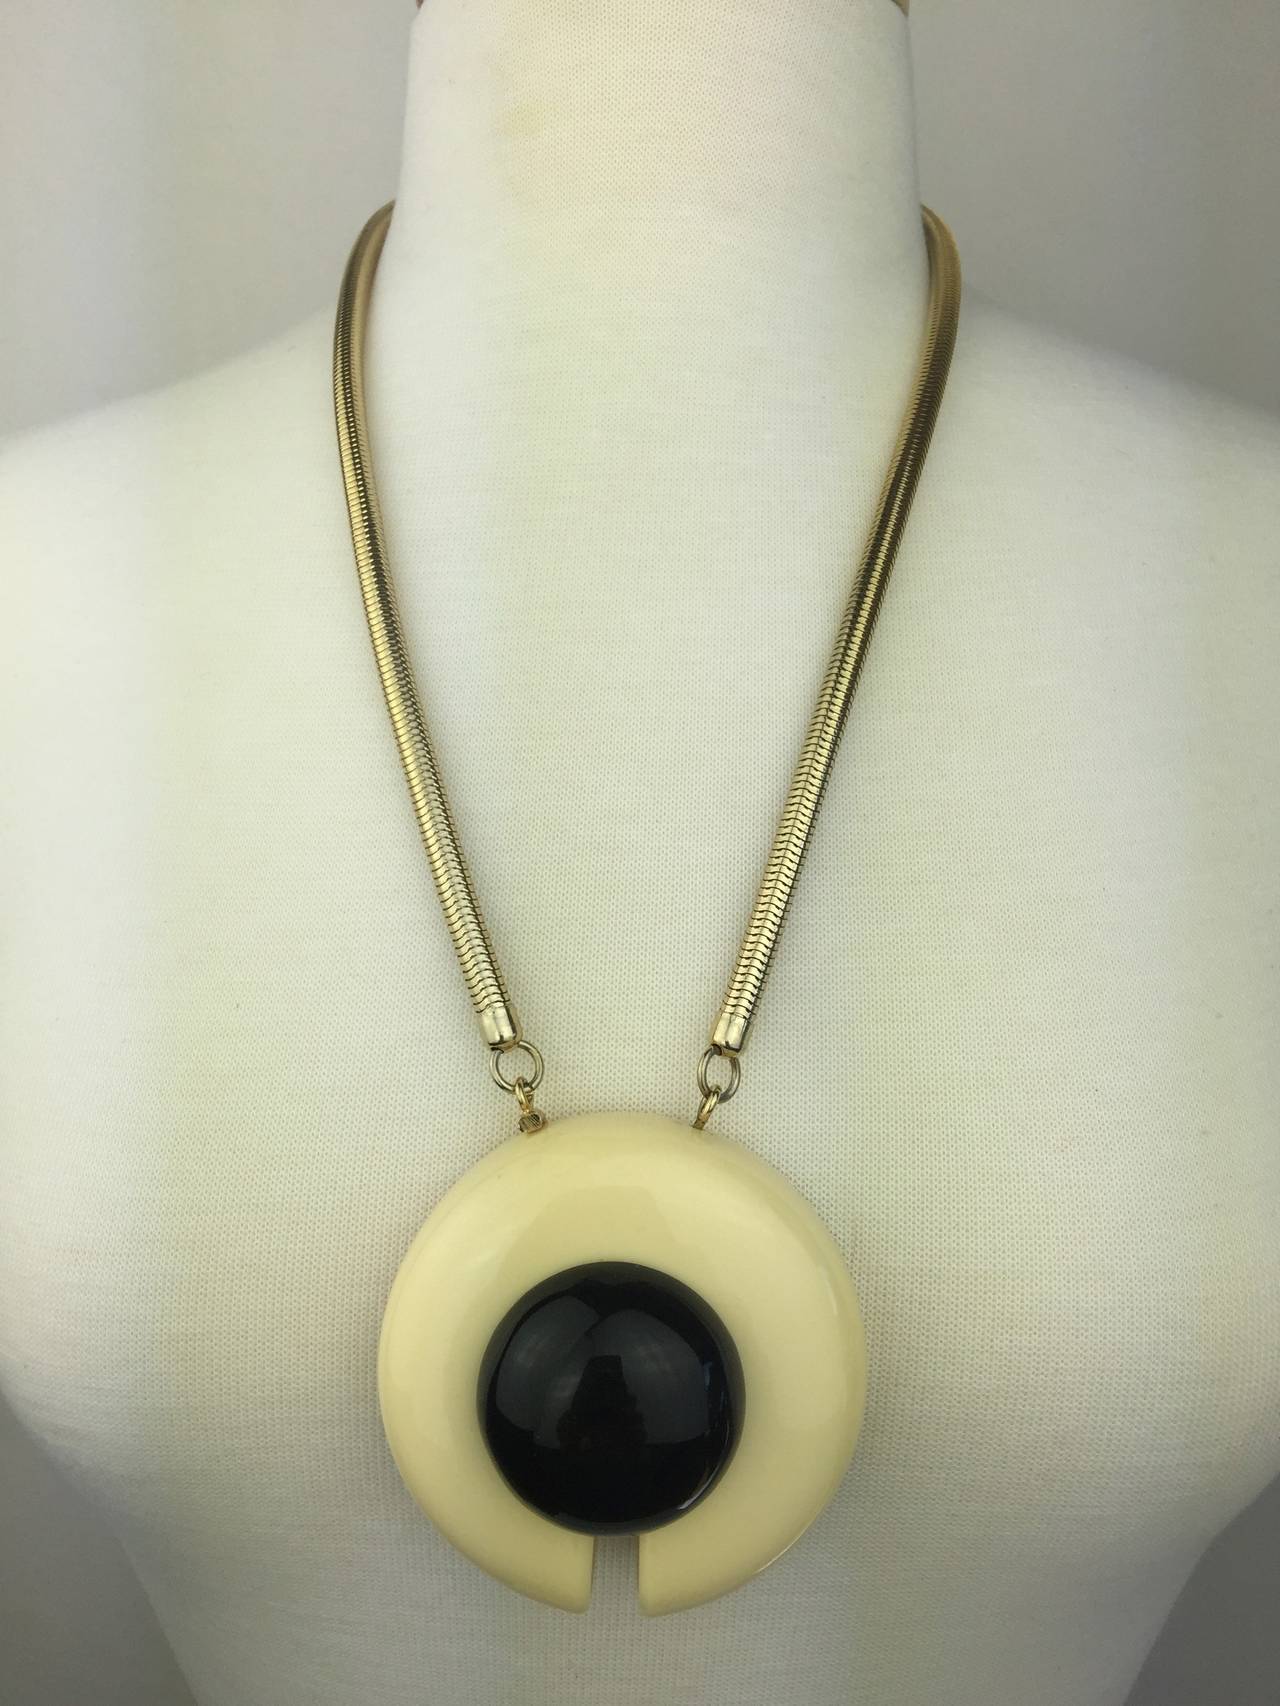 Modernist Bold 1970's Geometric Pendant by Lanvin Couture.